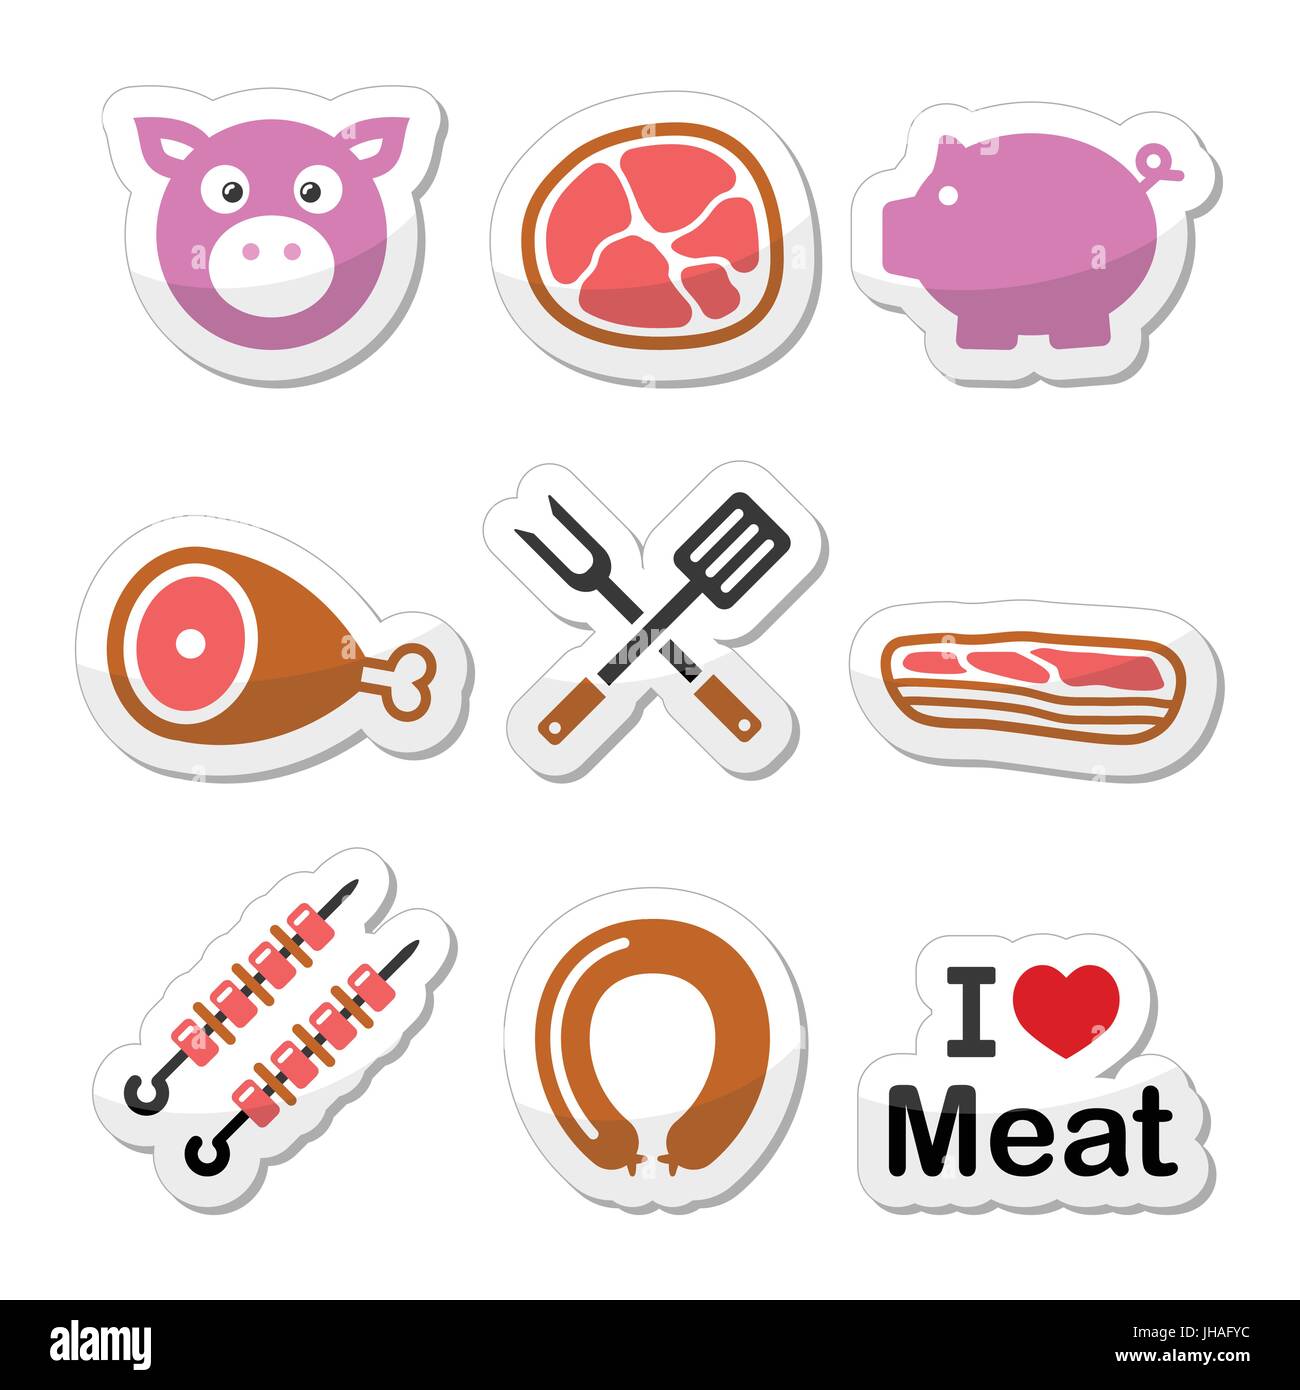 Pig, pork meat - ham and bacon labels icons set Colorful food ...